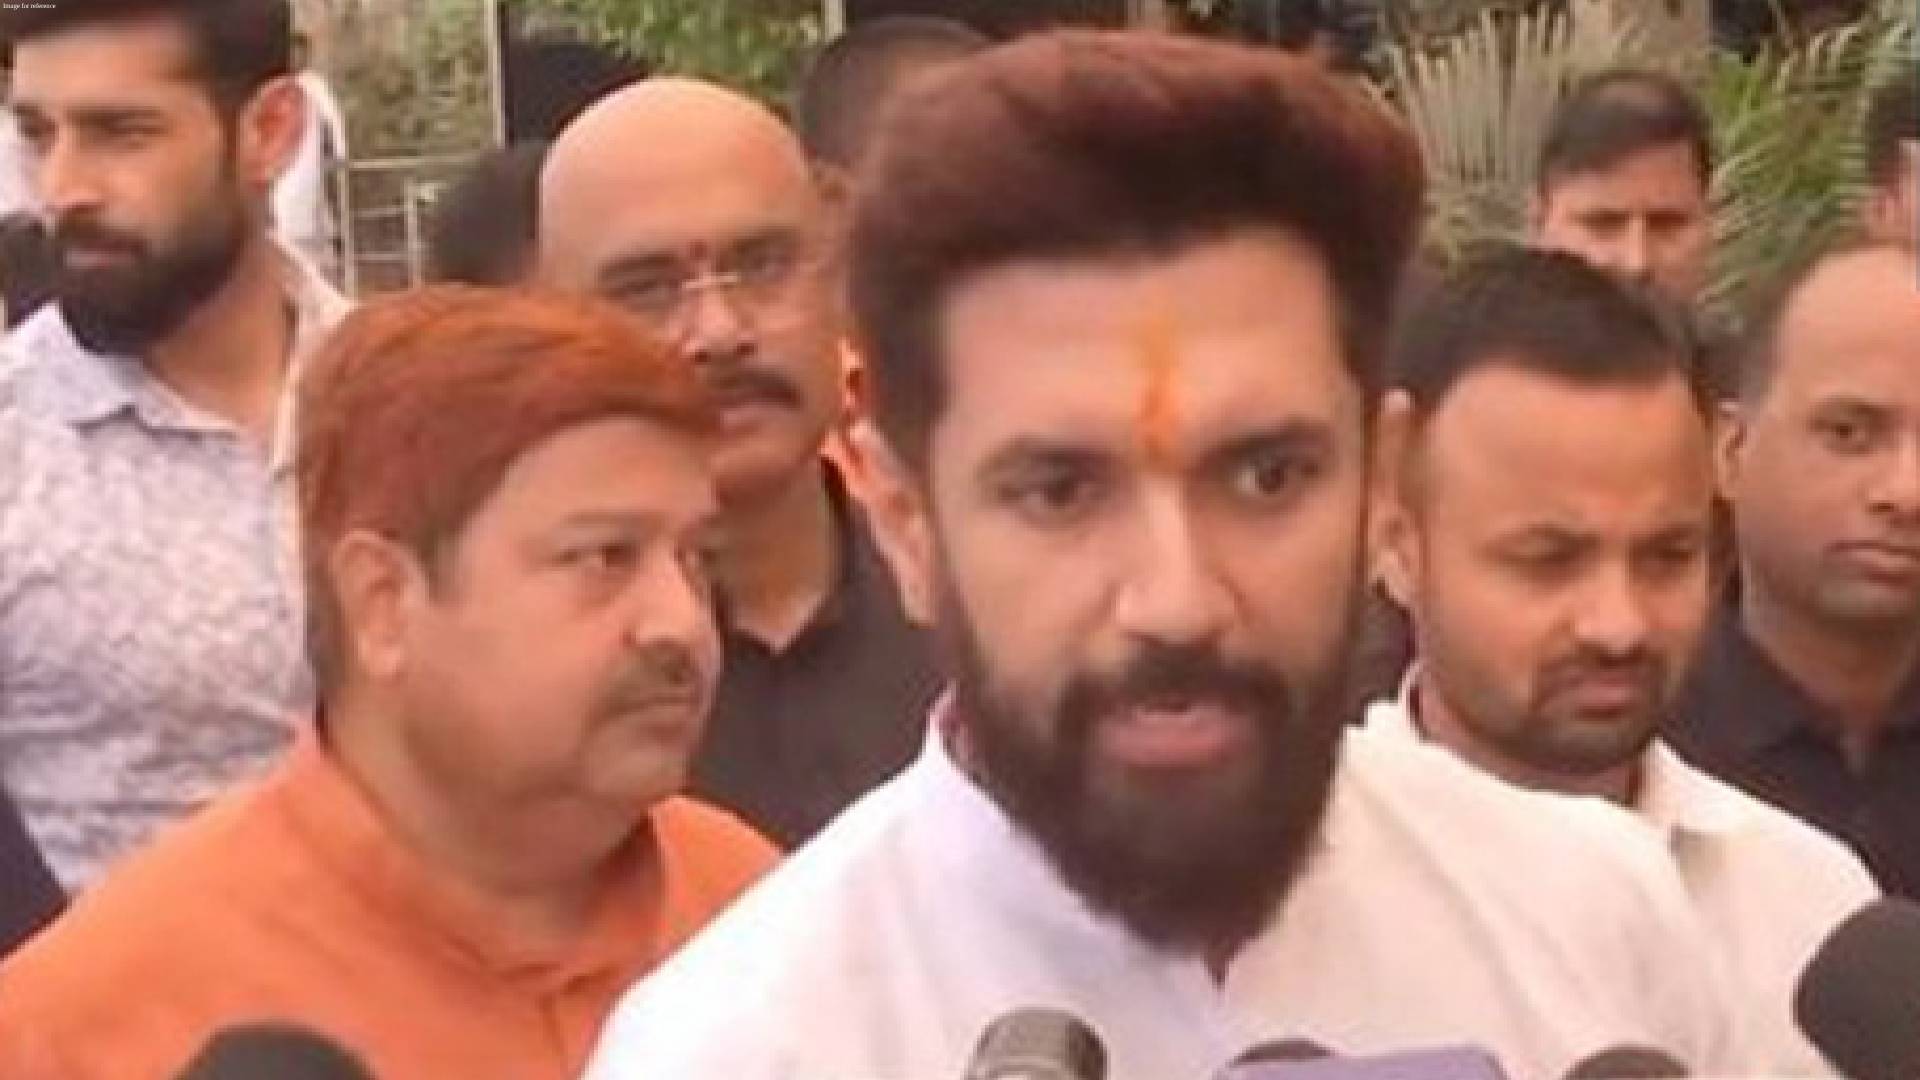 People of Bihar have made up their minds to elect NDA candidates: Chirag Paswan takes dig at RJD's Parivartan Patra